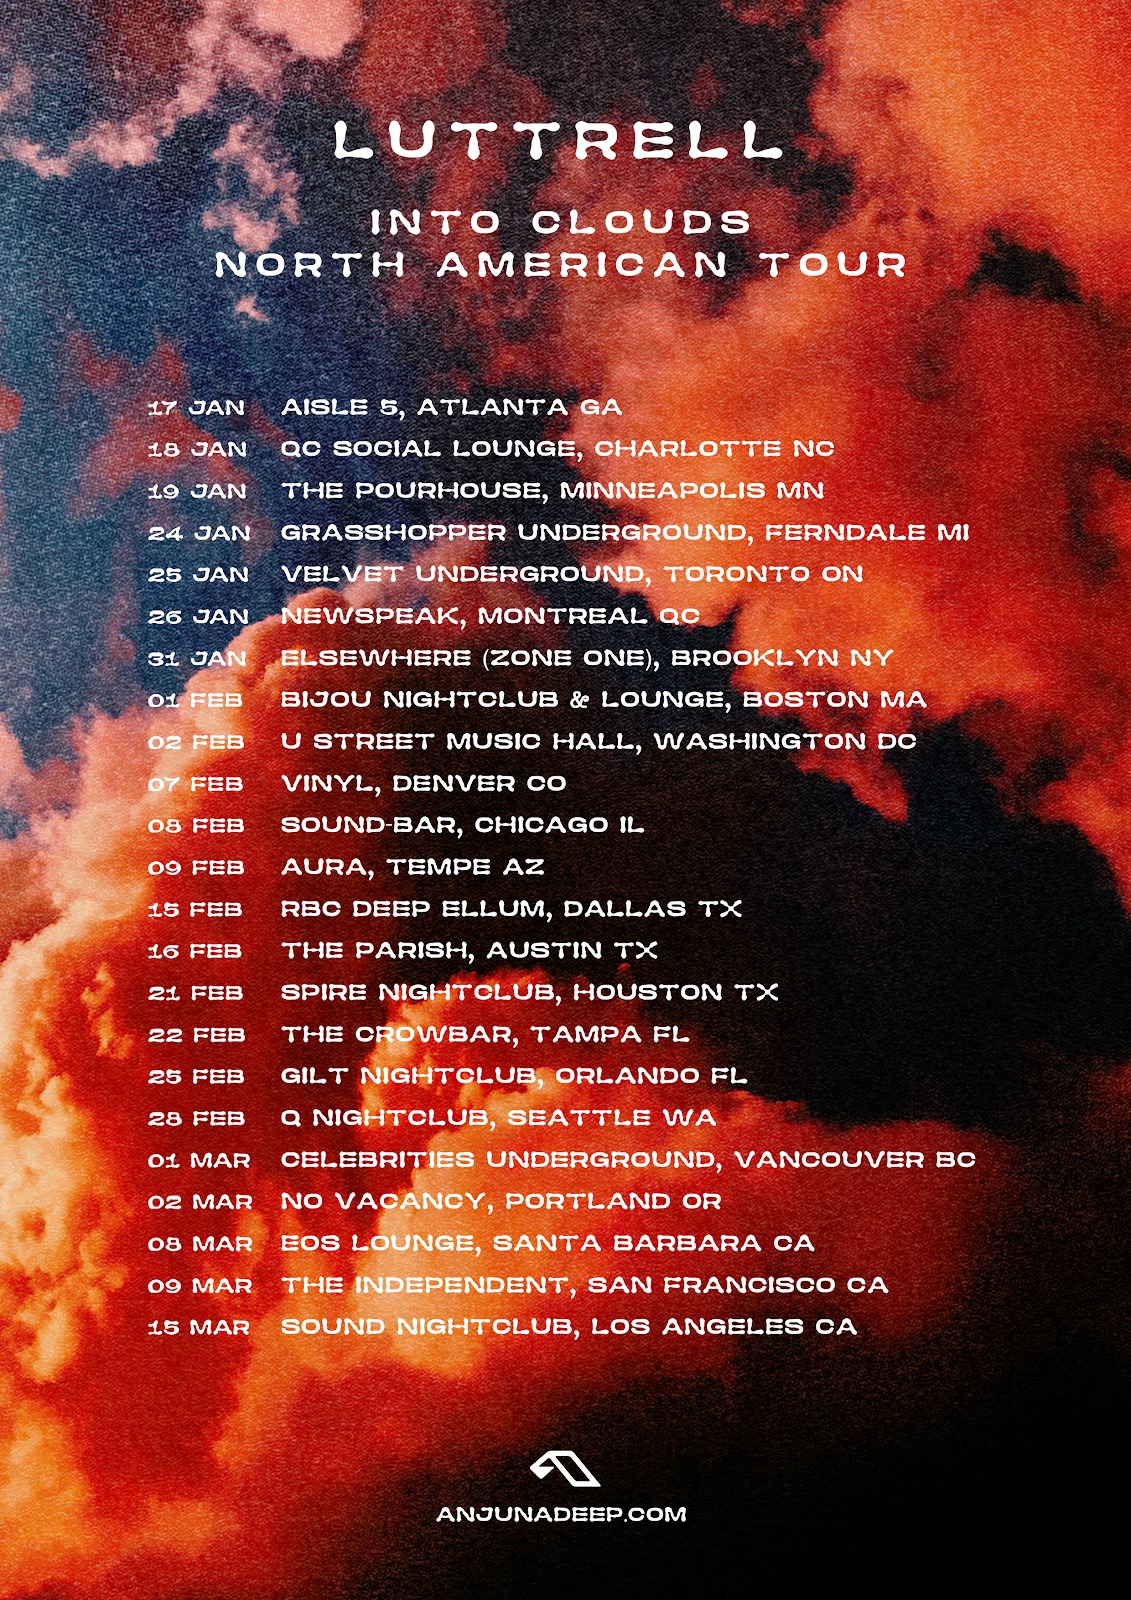 Luttrell Into Clouds North American Tour 2019